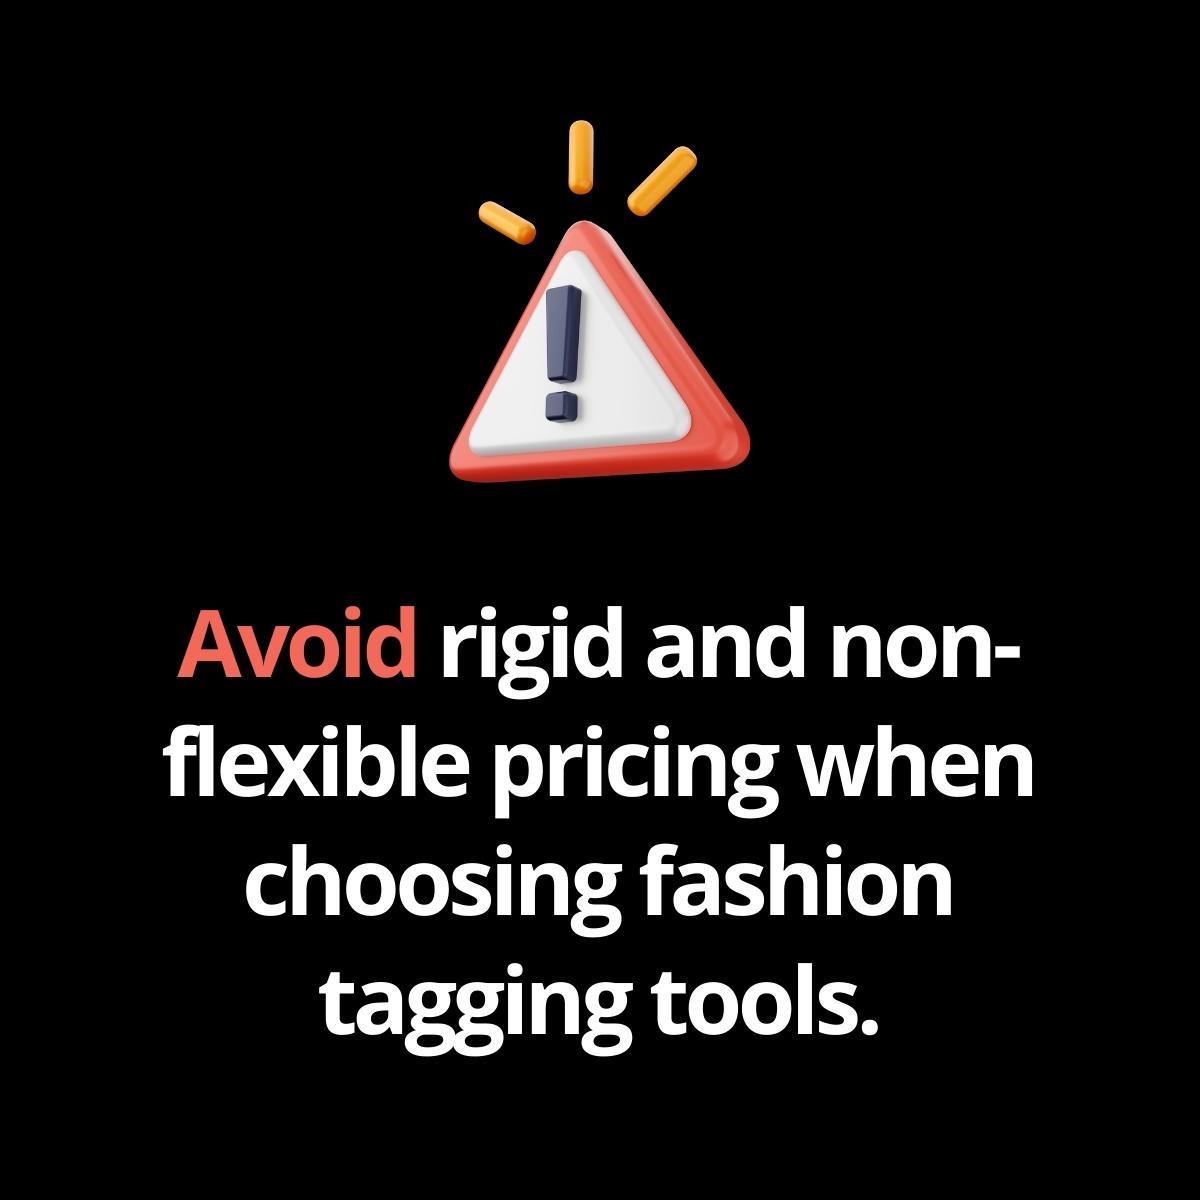 Advice on avoiding rigid pricing for fashion tagging tools